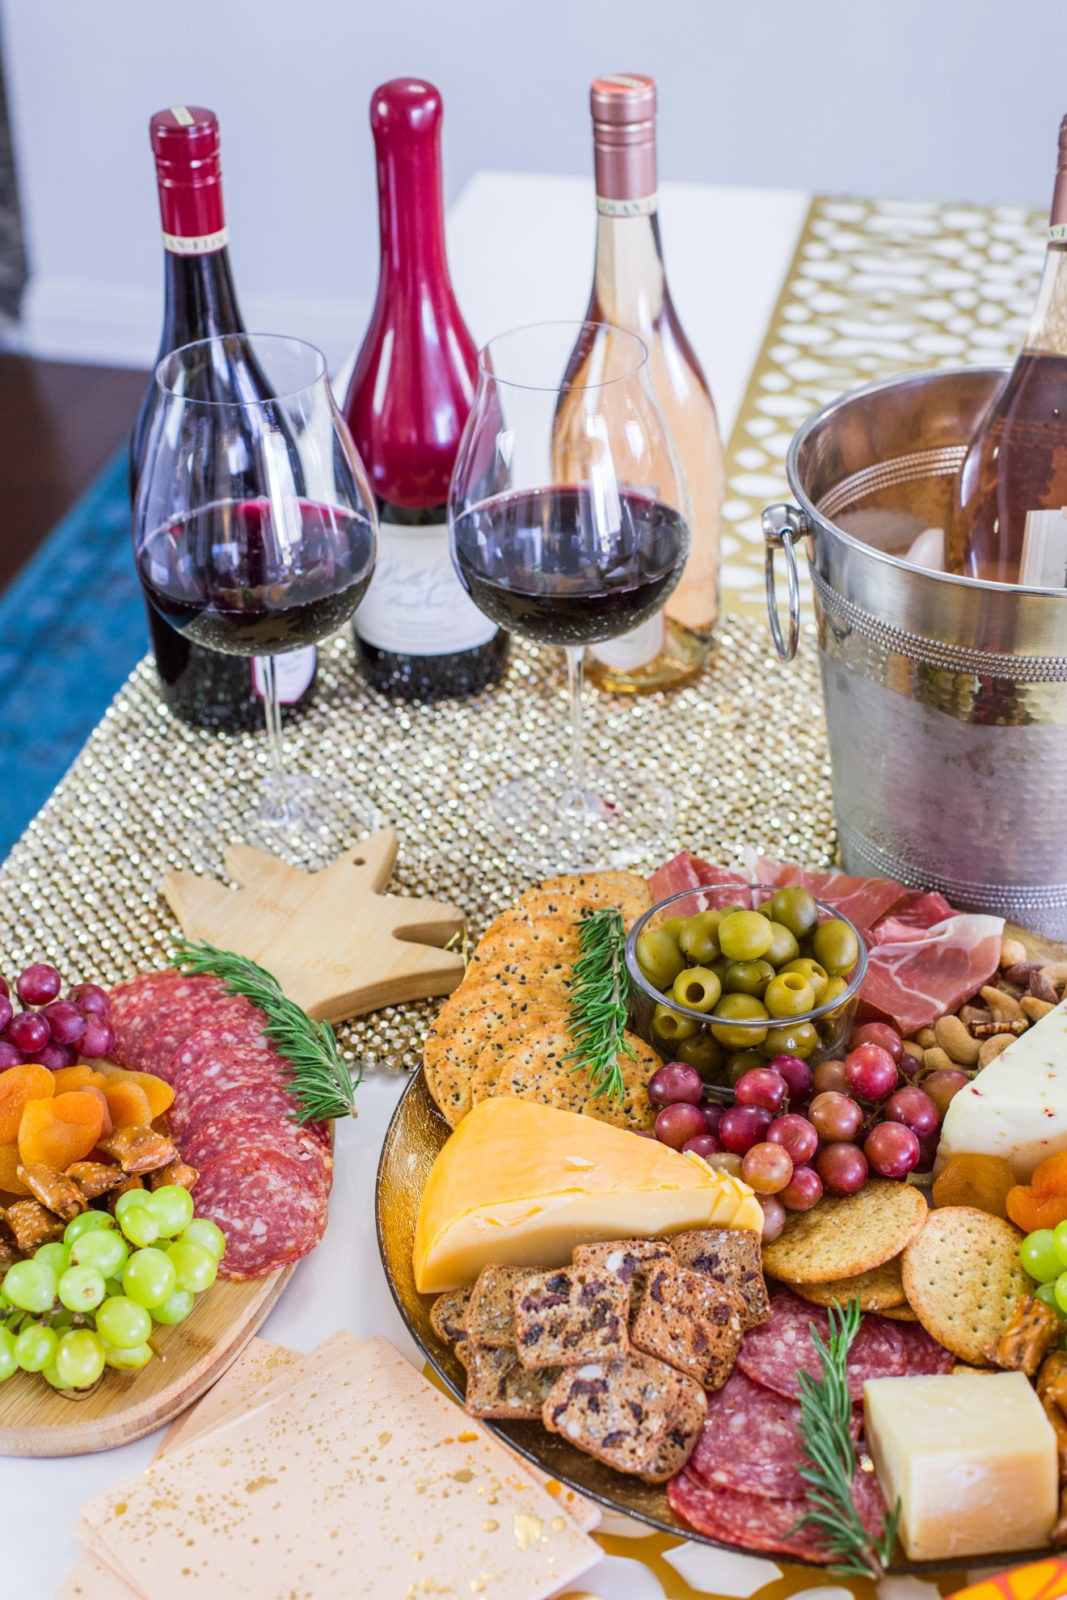 How to Make the best charcuterie board by Popular Lifestyle Blogger Laura Lily | Dinner Party Essentials: Hosting Tips, Table Settings Ideas and Bar Cart Inspiration by popular Los Angeles life and style blogger, Laura Lily: image of charcuterie boards and bottles of red wine. 